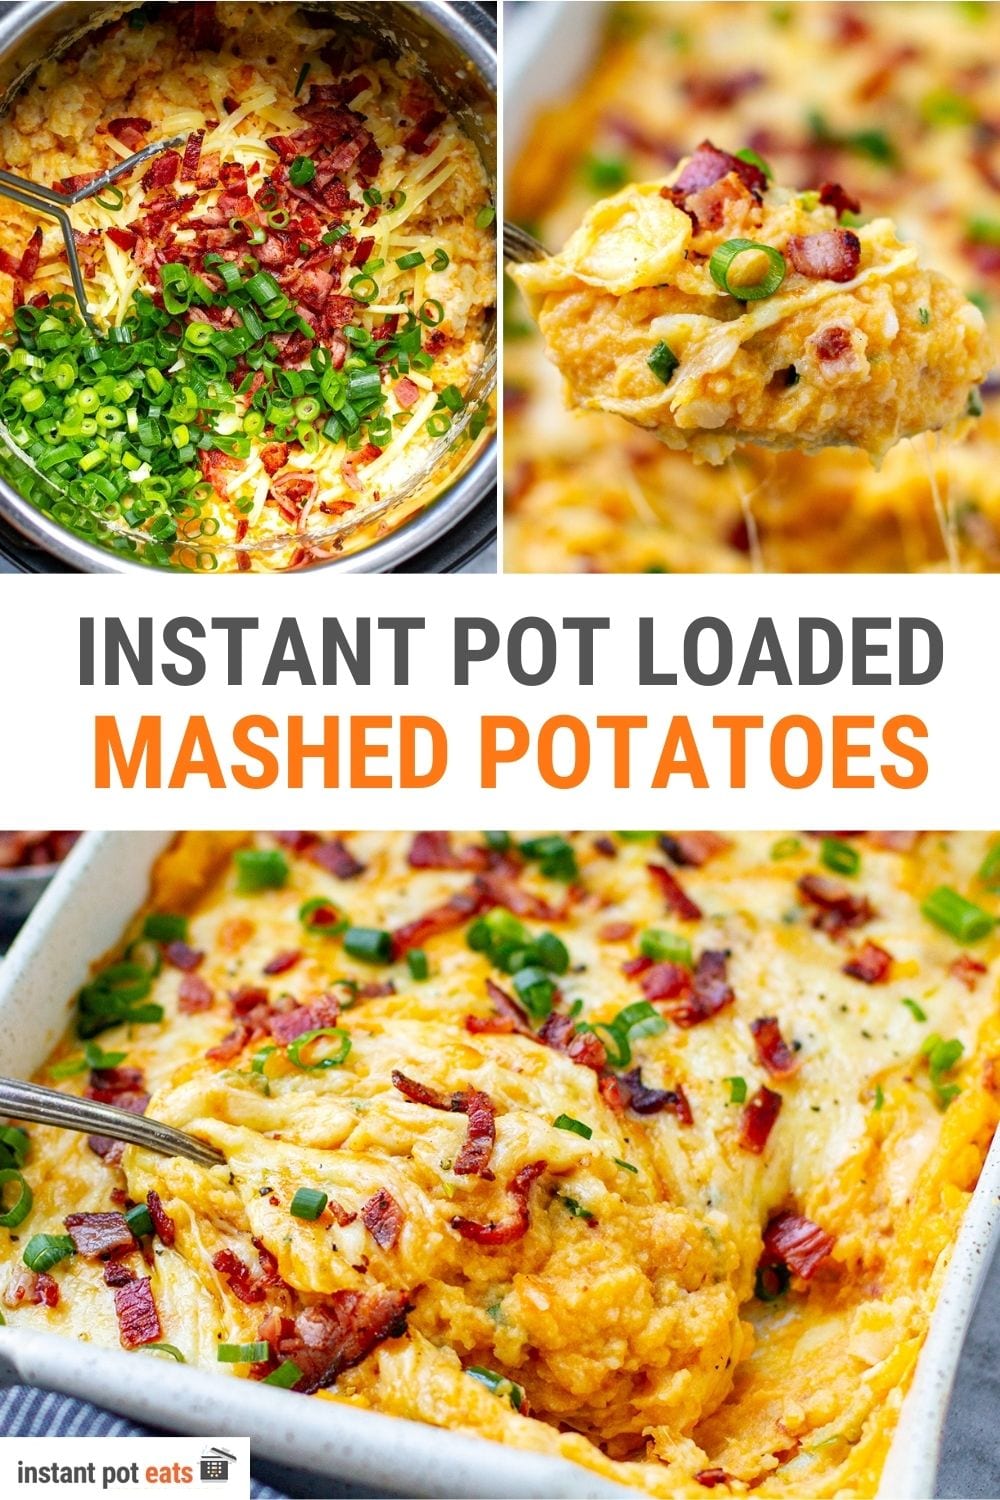 Instant Pot Loaded Mashed Potatoes (With Or Without Oven!)